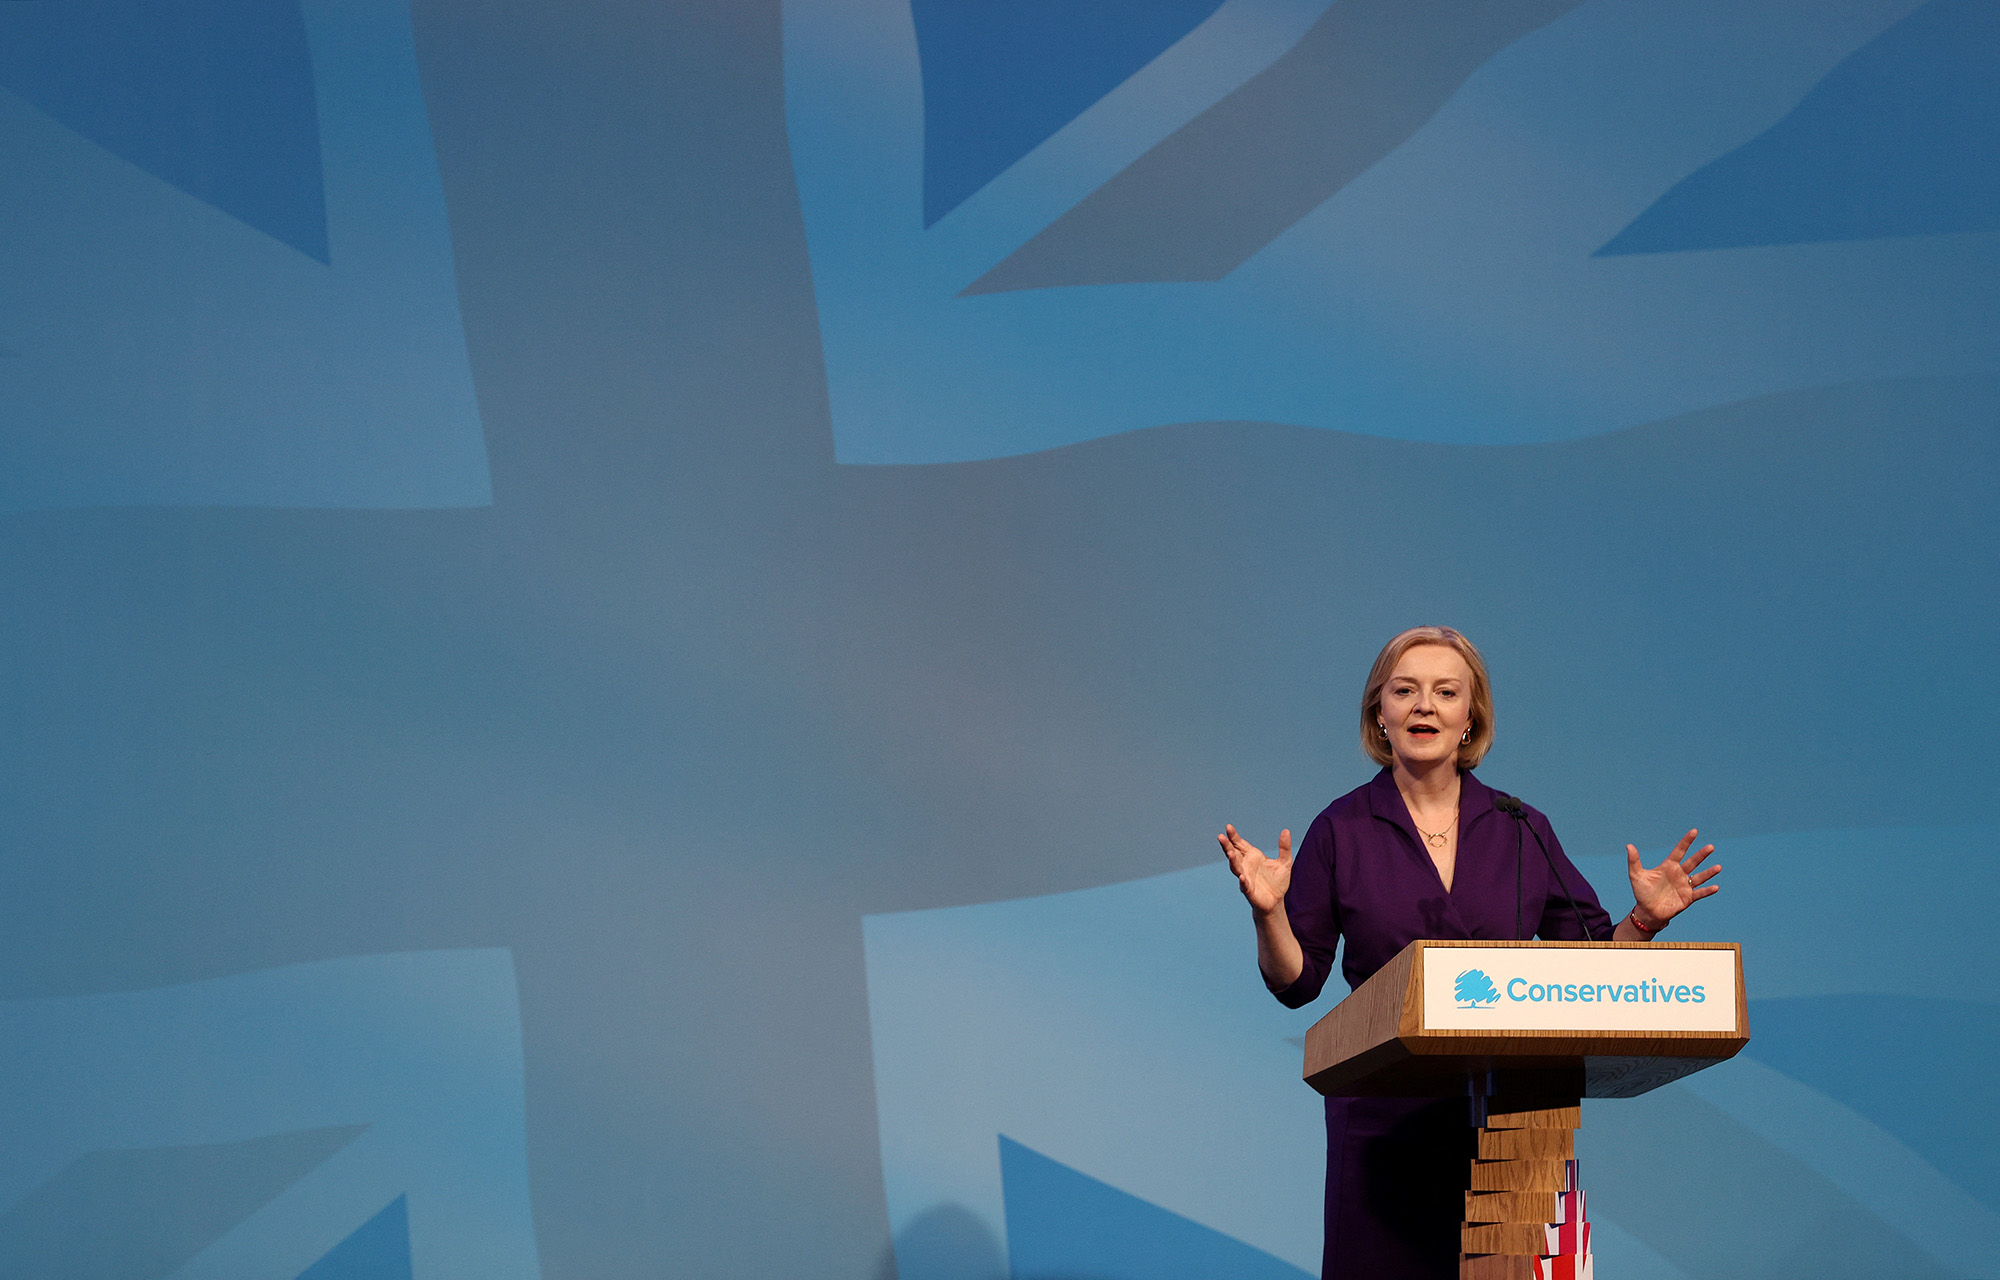 New Conservative Party leader and Britain's Prime Minister-elect Liz Truss delivers a speech at an event to announce the winner of the Conservative Party leadership contest in central London on September 5.